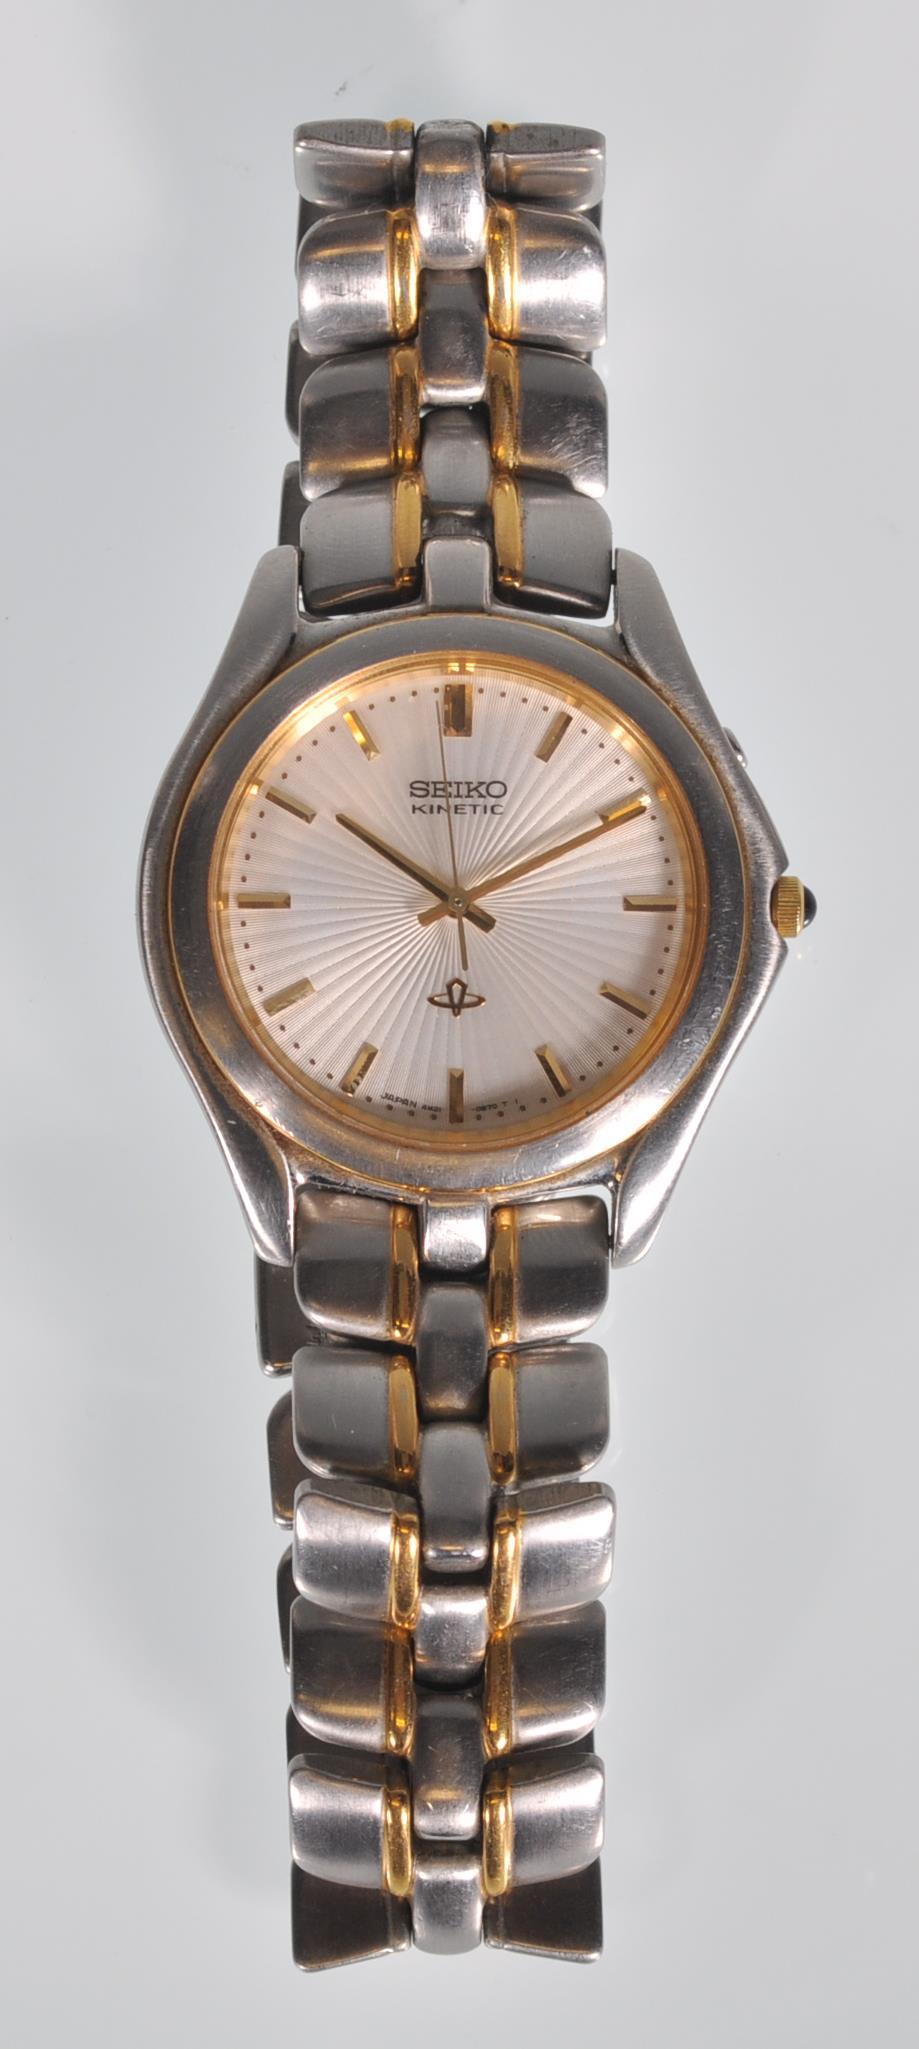 A gents Seiko Kinetic wristwatch having a textured silvered dial with gilt baton markers and hands